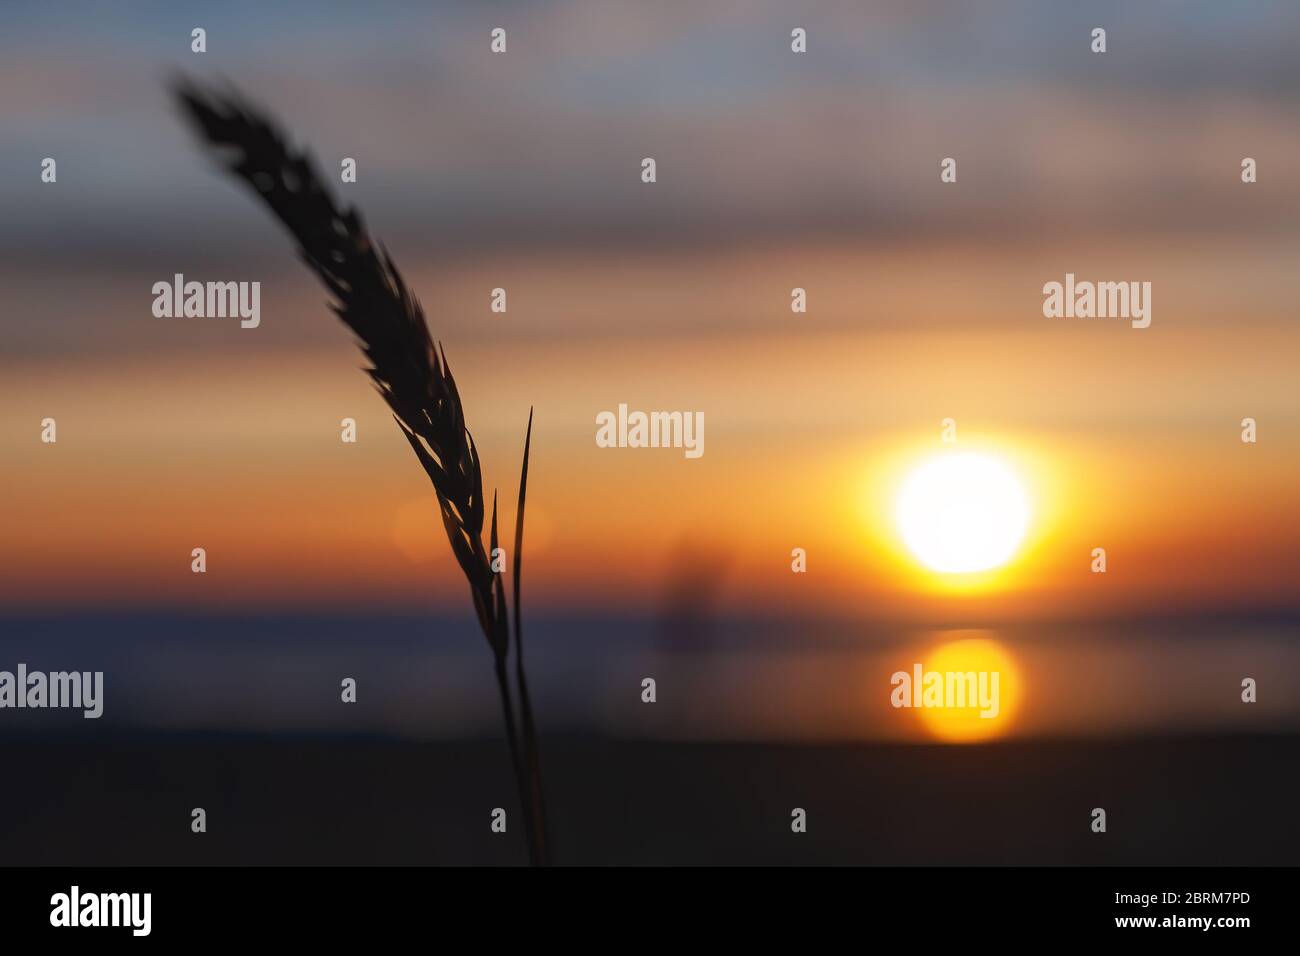 silhouette of a spikelet or blade of grass on a background of blurred sky and sunset on the sea Stock Photo